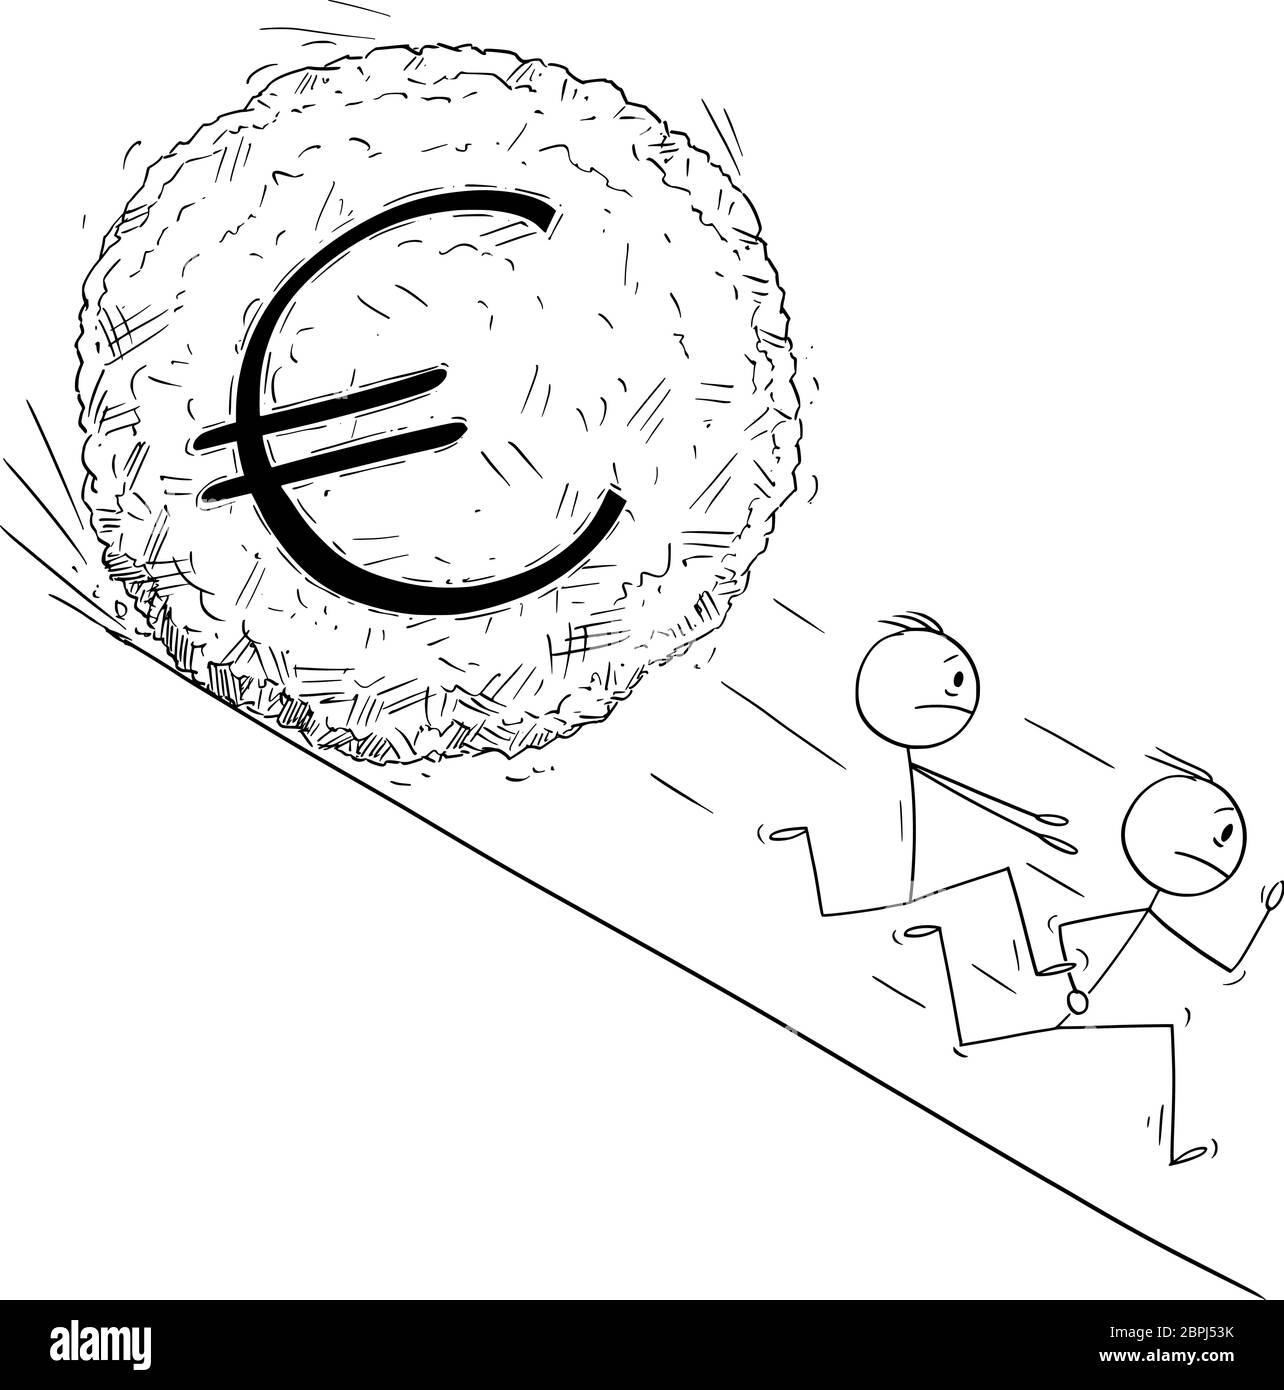 Vector cartoon stick figure drawing conceptual illustration of group of investor or businessmen running away from euro currency symbol boulder rolling down hill. Financial concept. Stock Vector